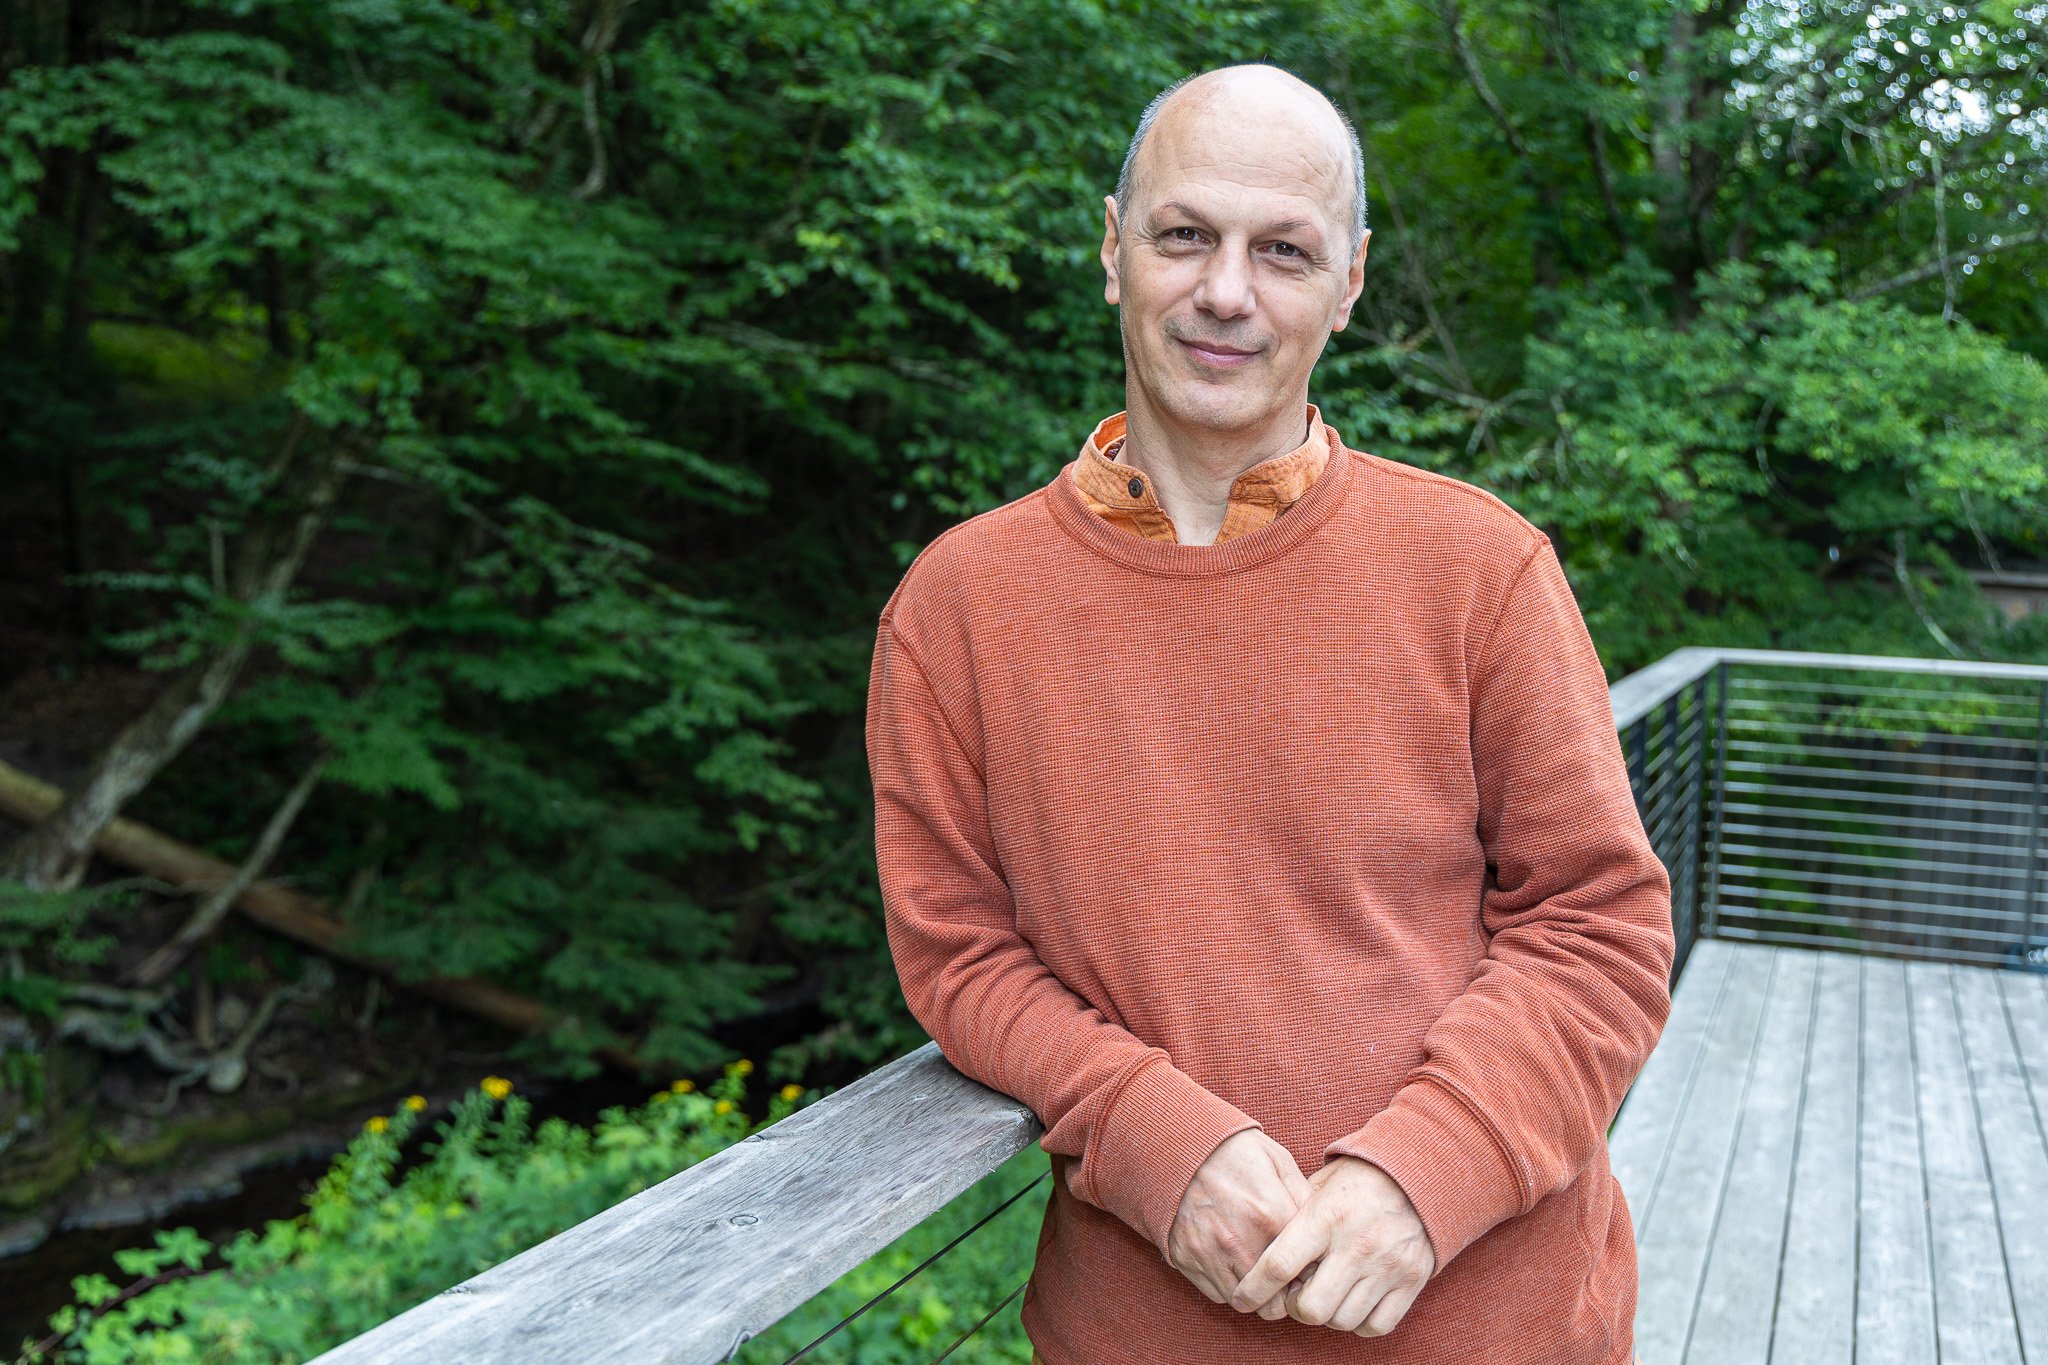 former monk and yoga teacher Prem Sadasivananda casually leaning against a wooden railing with a backdrop of lush trees